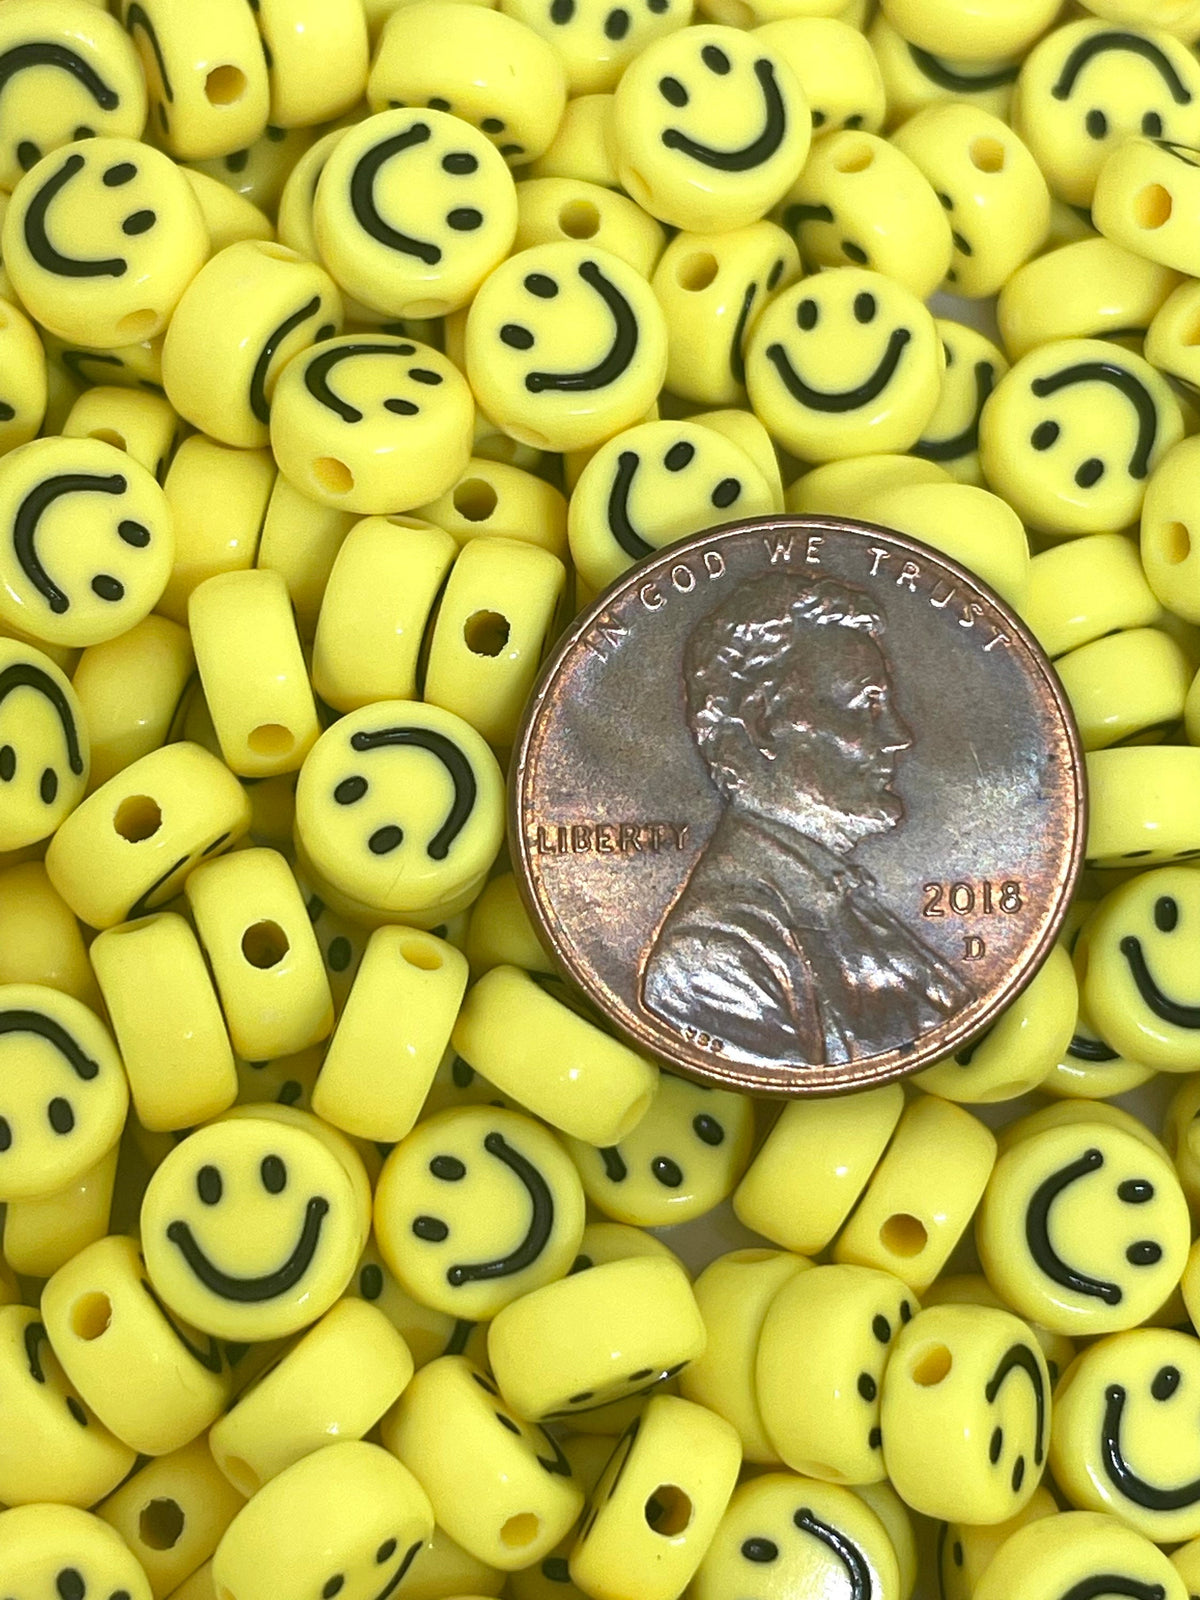 Yellow Smiley Face Polymer Clay Beads, Smiley Face Fimo Cane Beads, Happy  Face Emoji Beads, Bead for Bracelet, Beading Supplies 231 